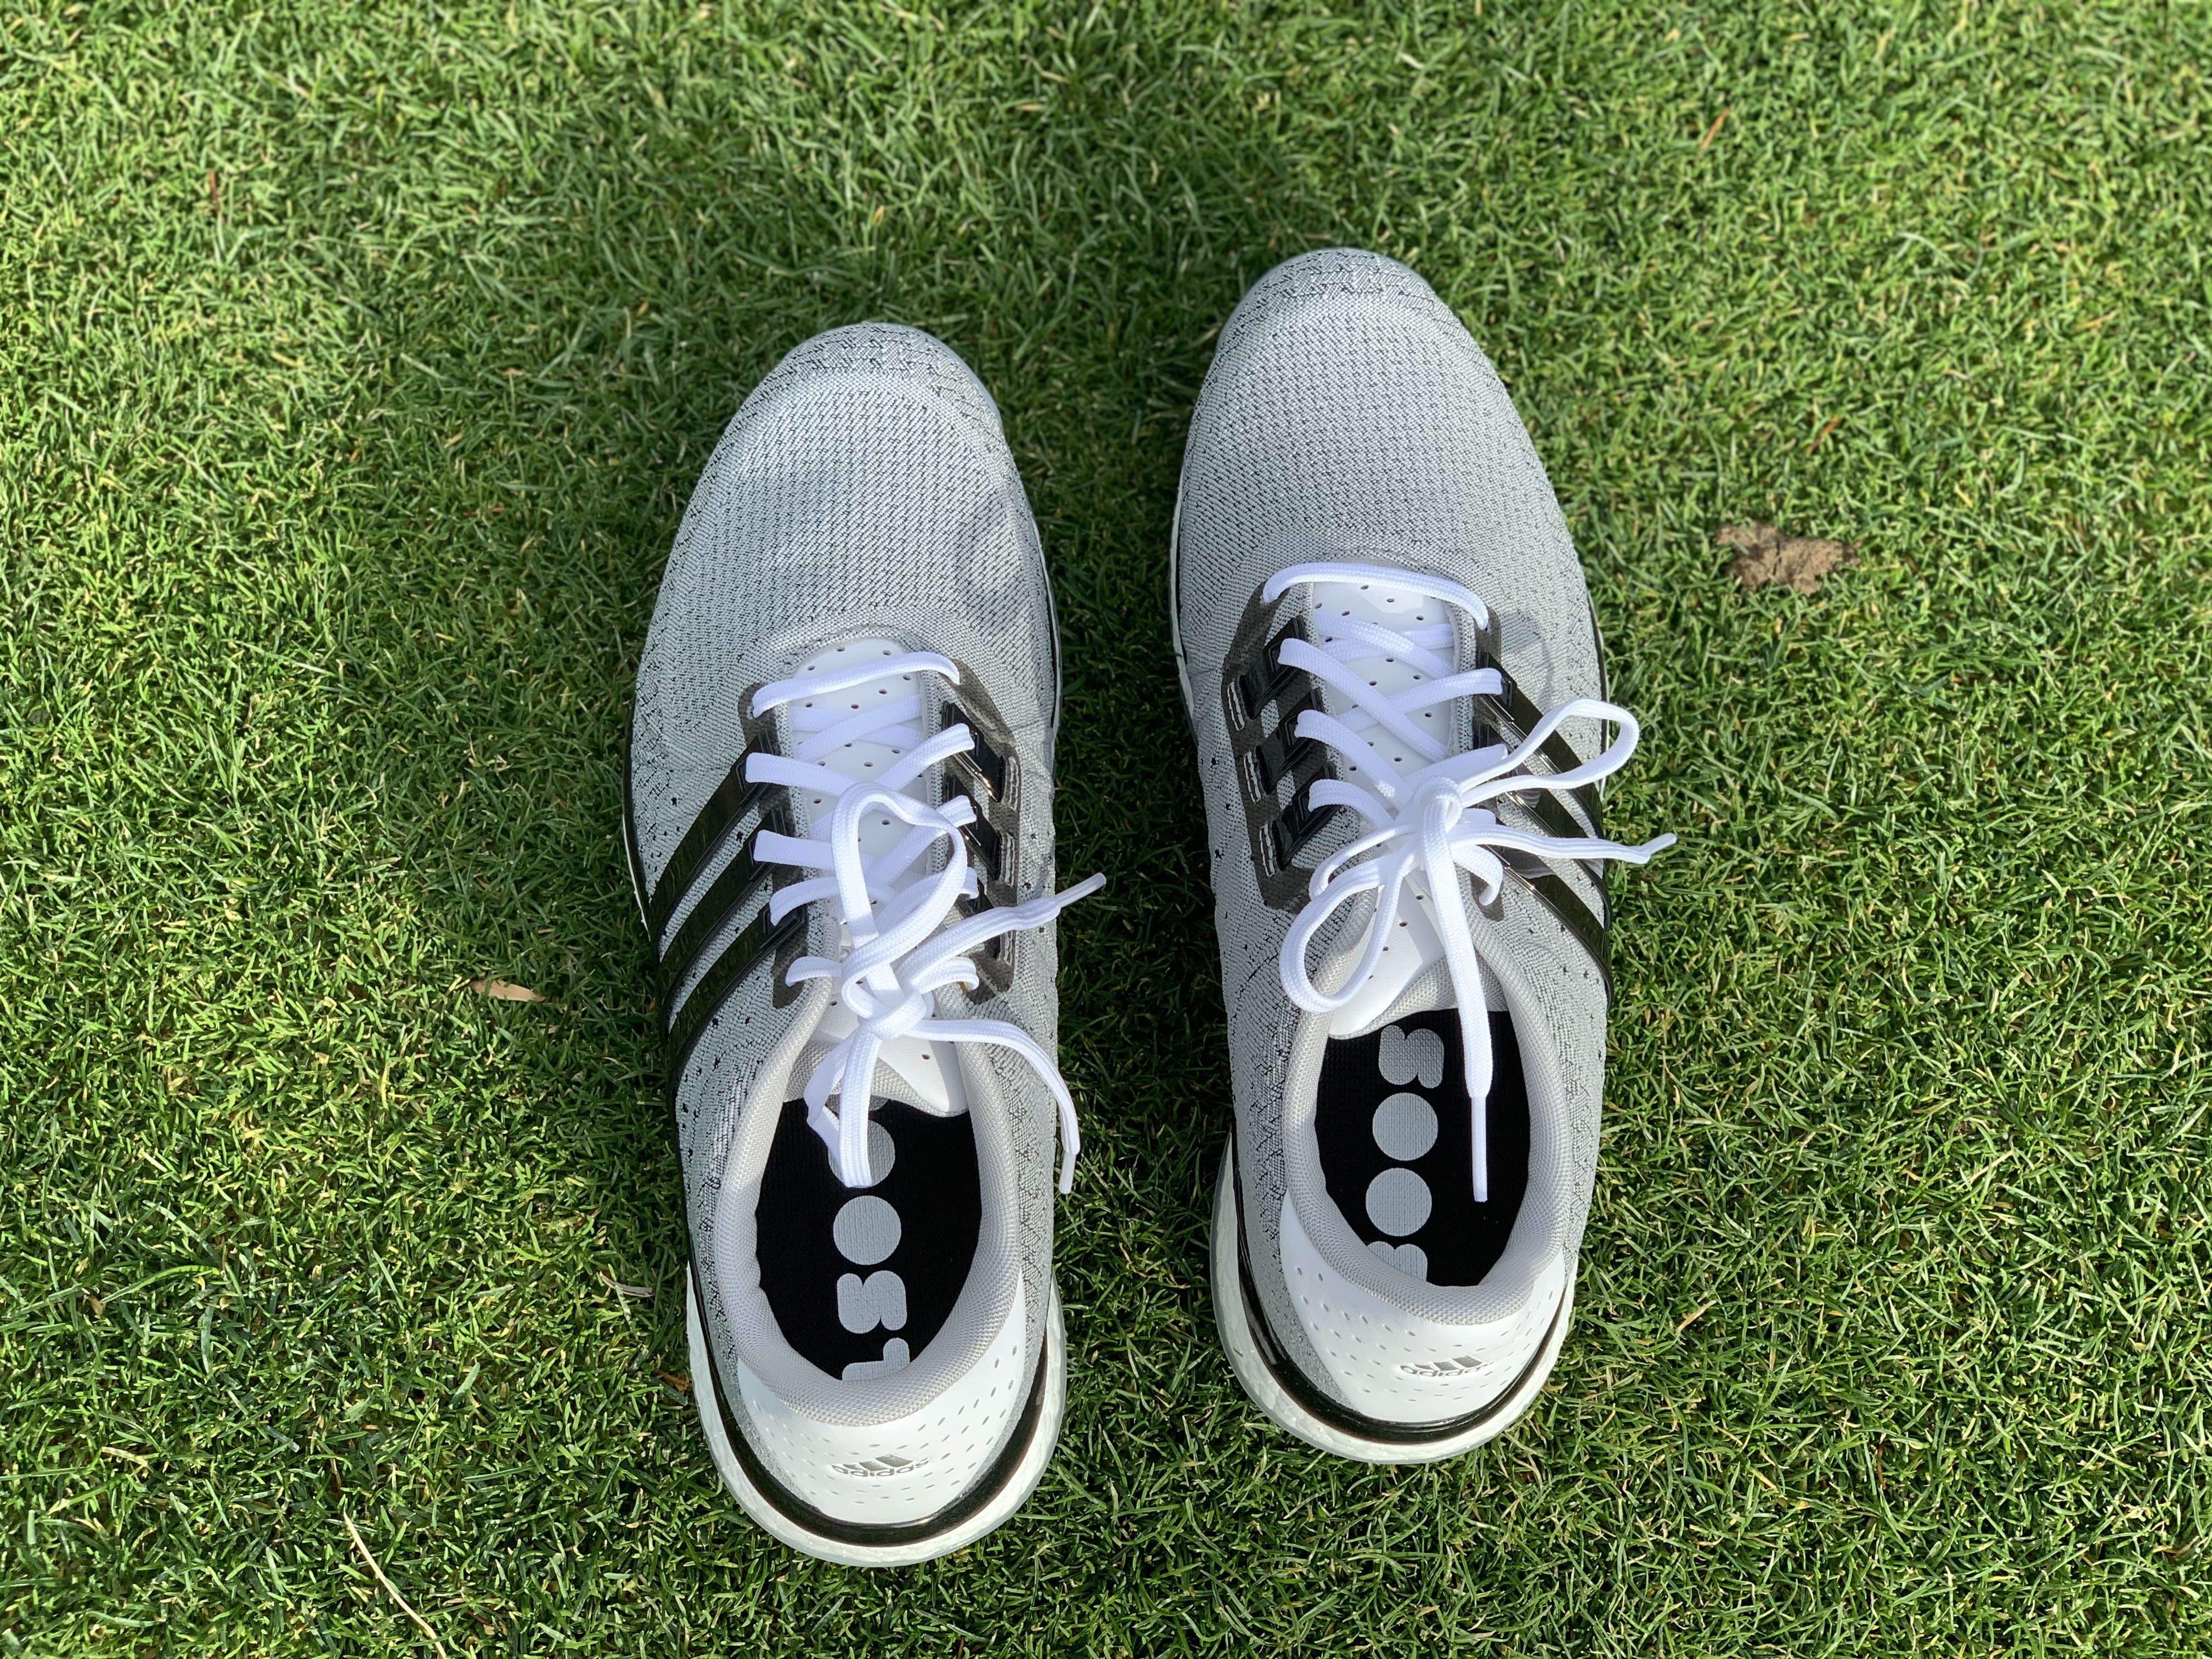 mangfoldighed Bevidst suge The #1 Writer in Golf: Adidas TOUR360 XT SL Textile Golf Shoes Review: 2020  PGAPappas 12 Days of Christmas Golf Giveaway DAY 10